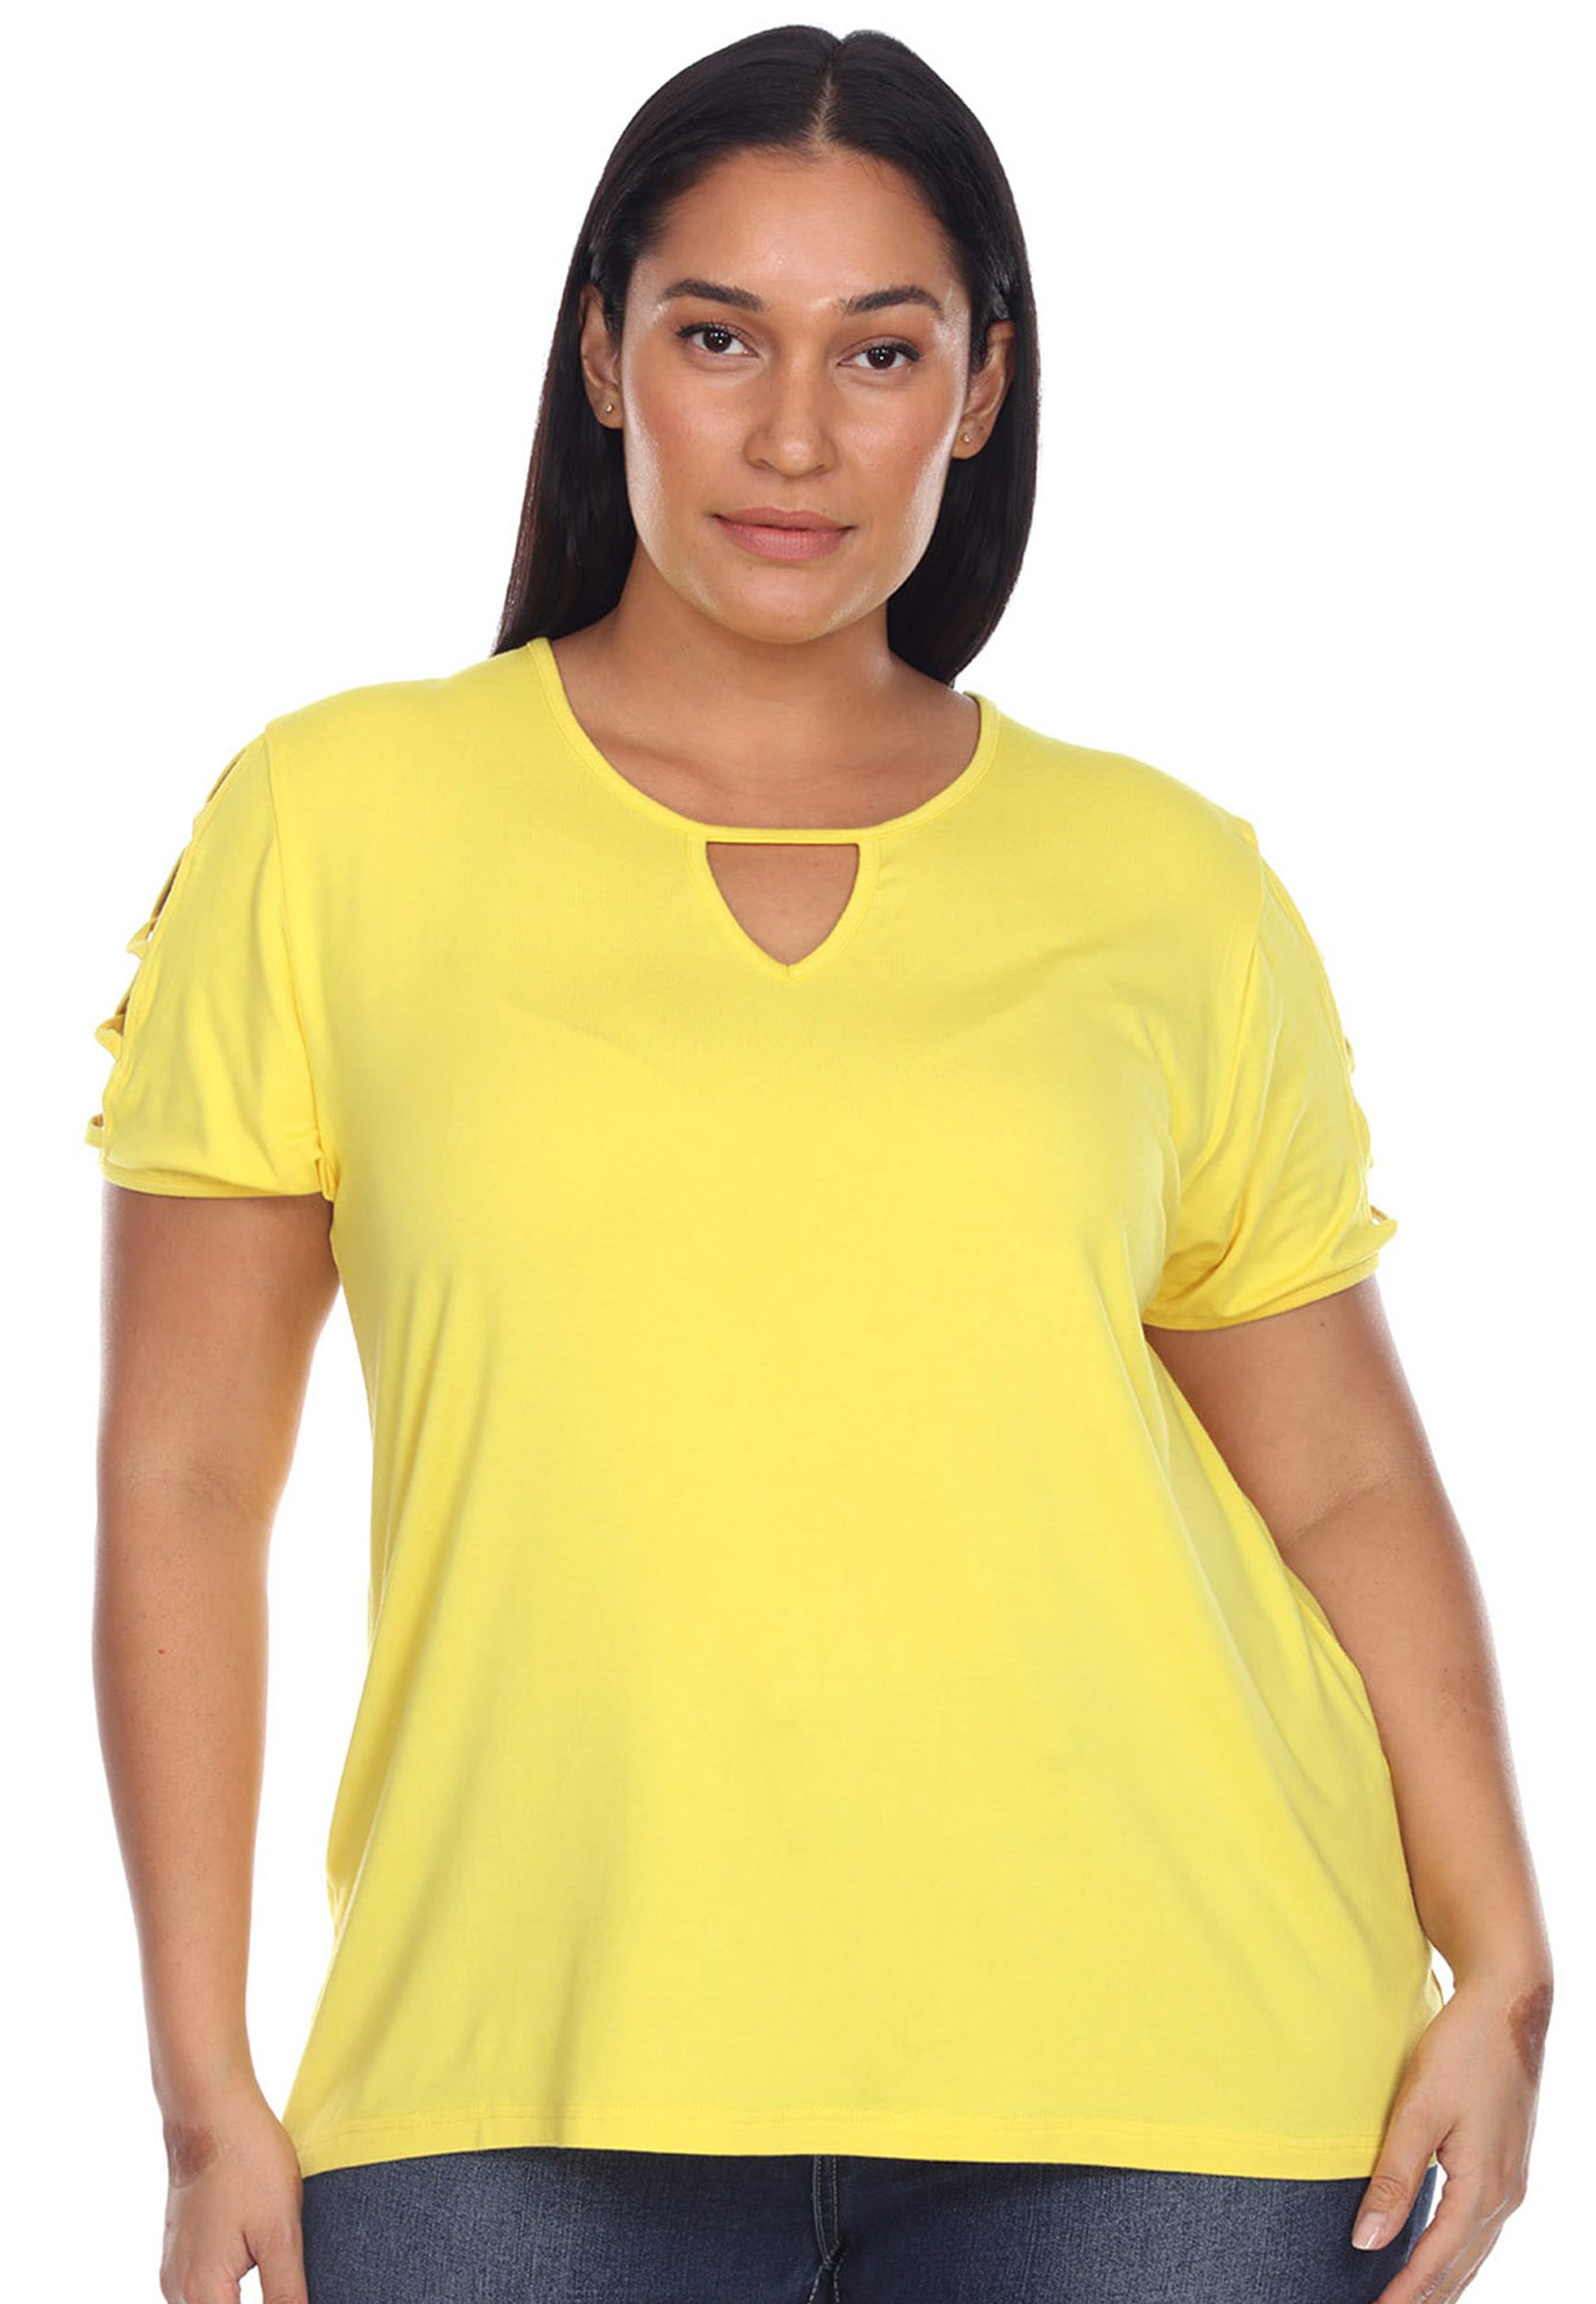 Buy theRebelinme Plus Size Women Pale Yellow Solid V-Neck T-Shirt online